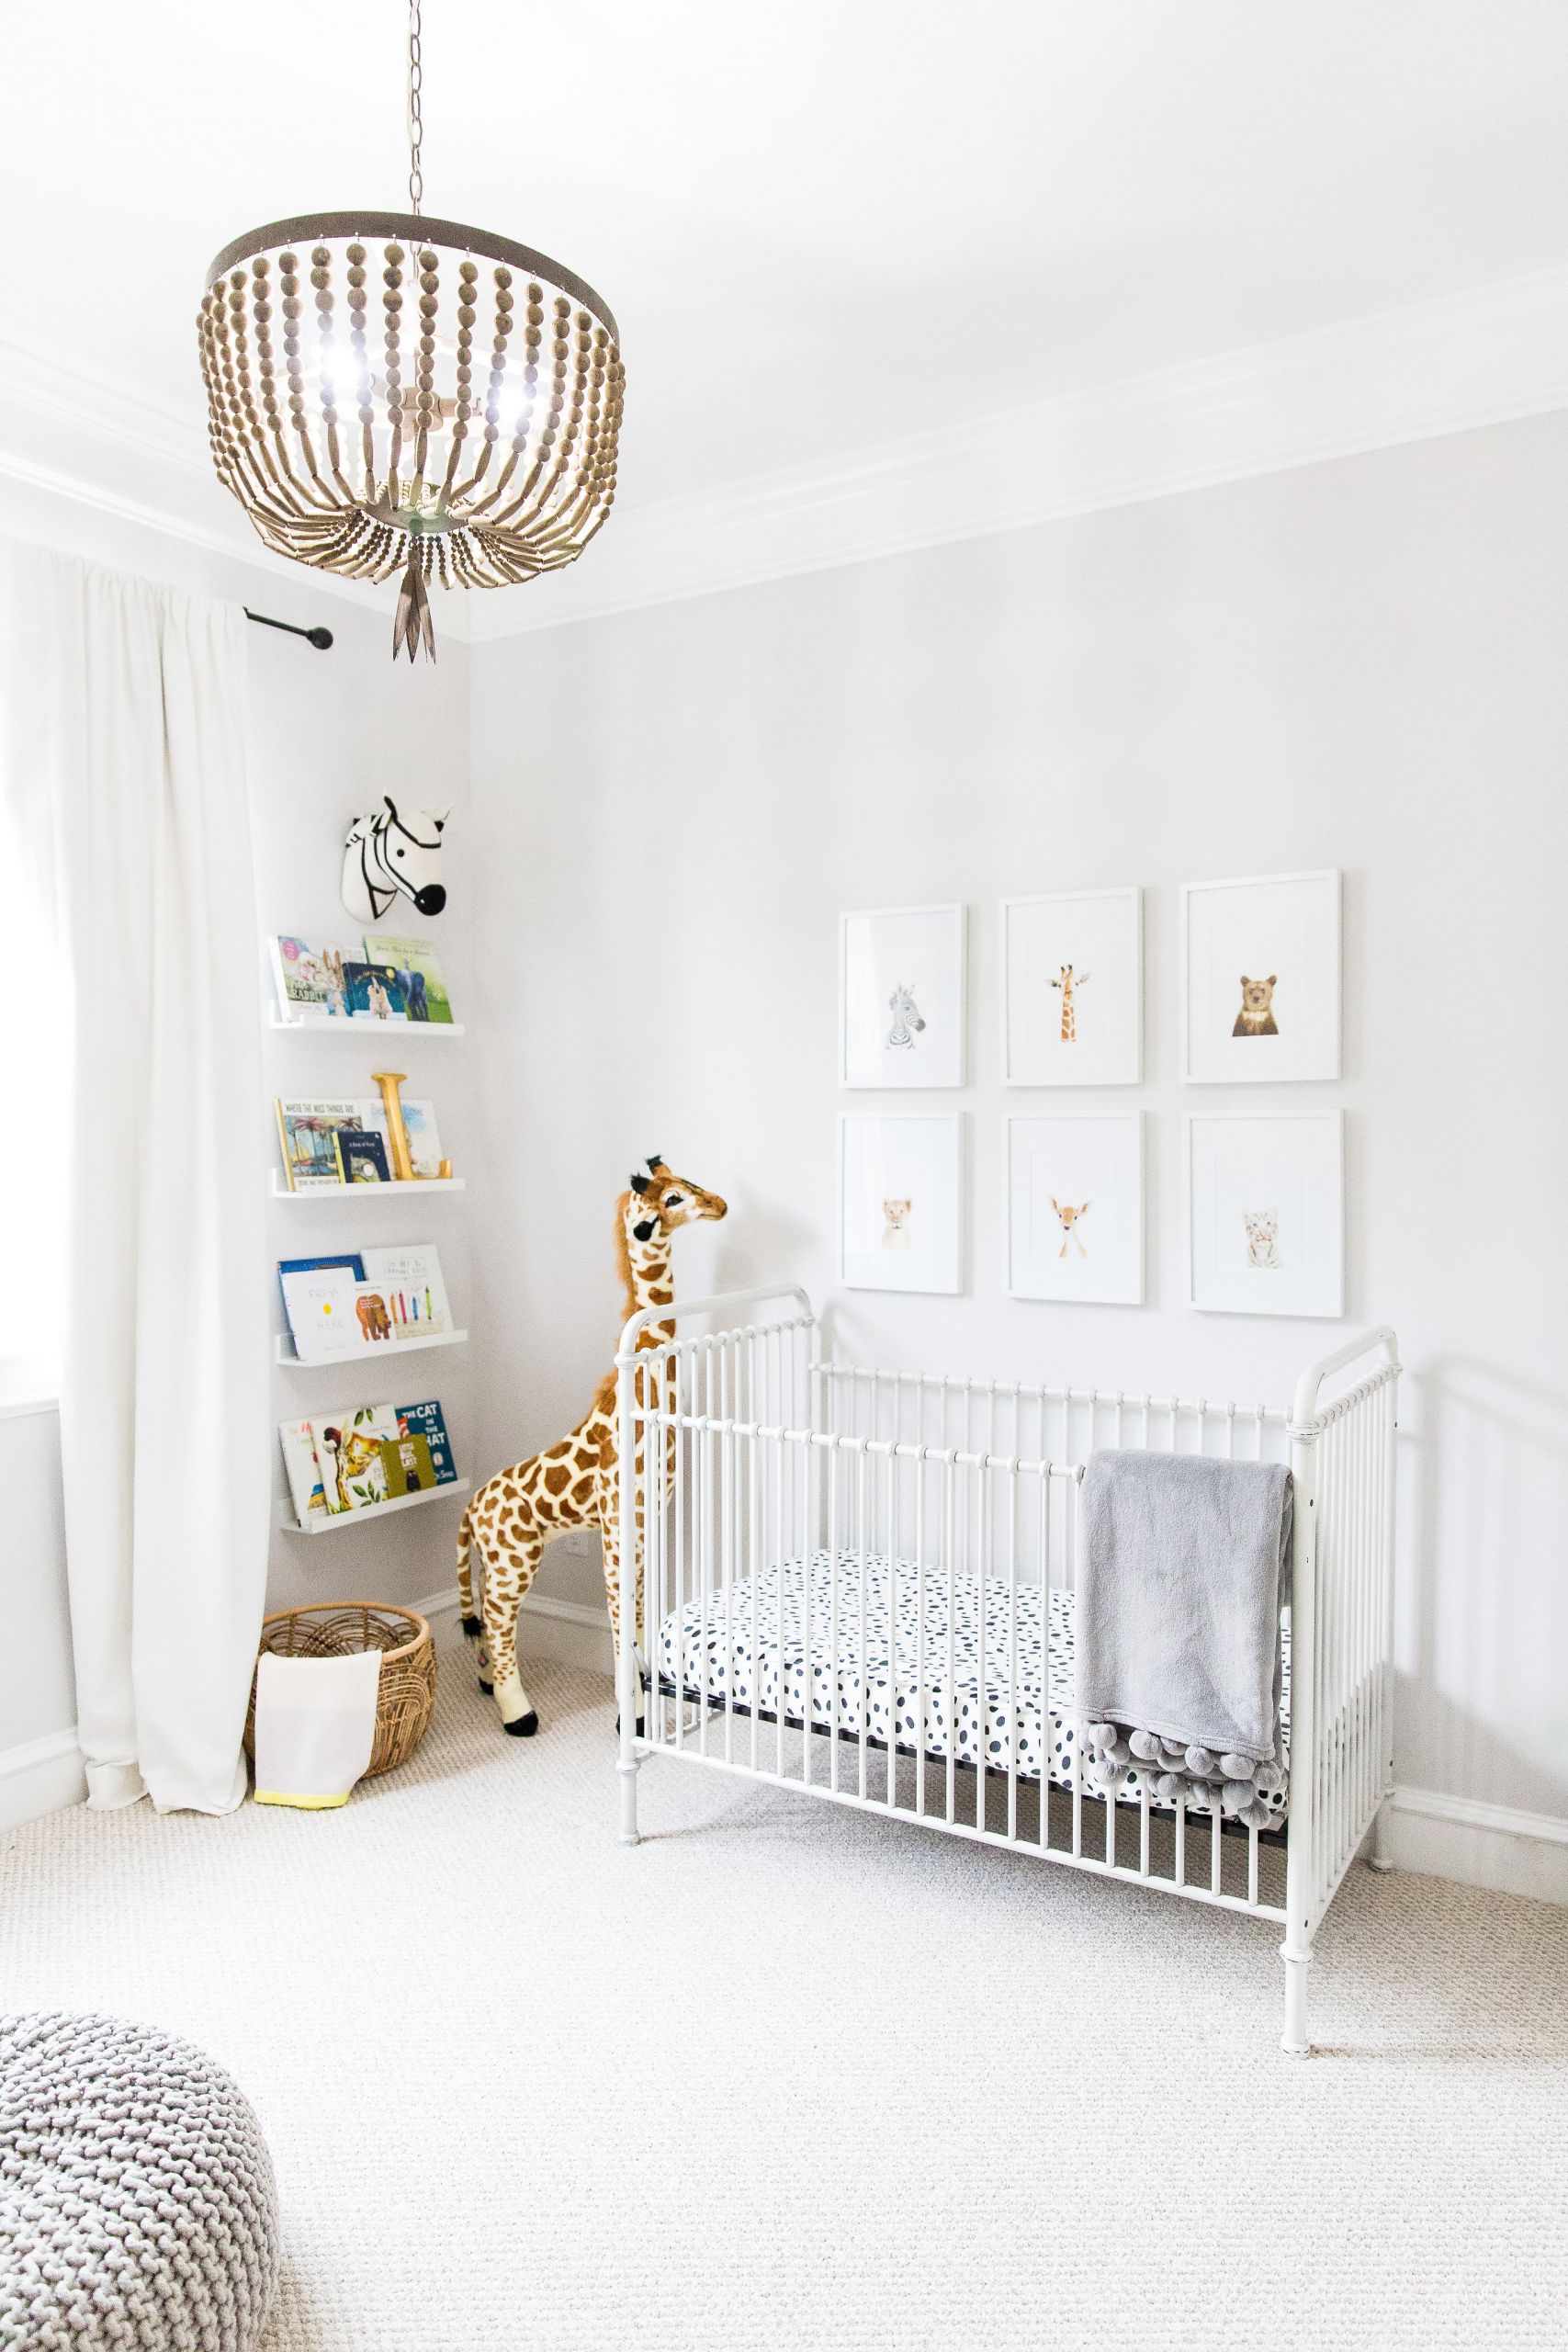 Jungle Baby Room Decor
 In the Nursery with Veronika s Blushing Project Nursery